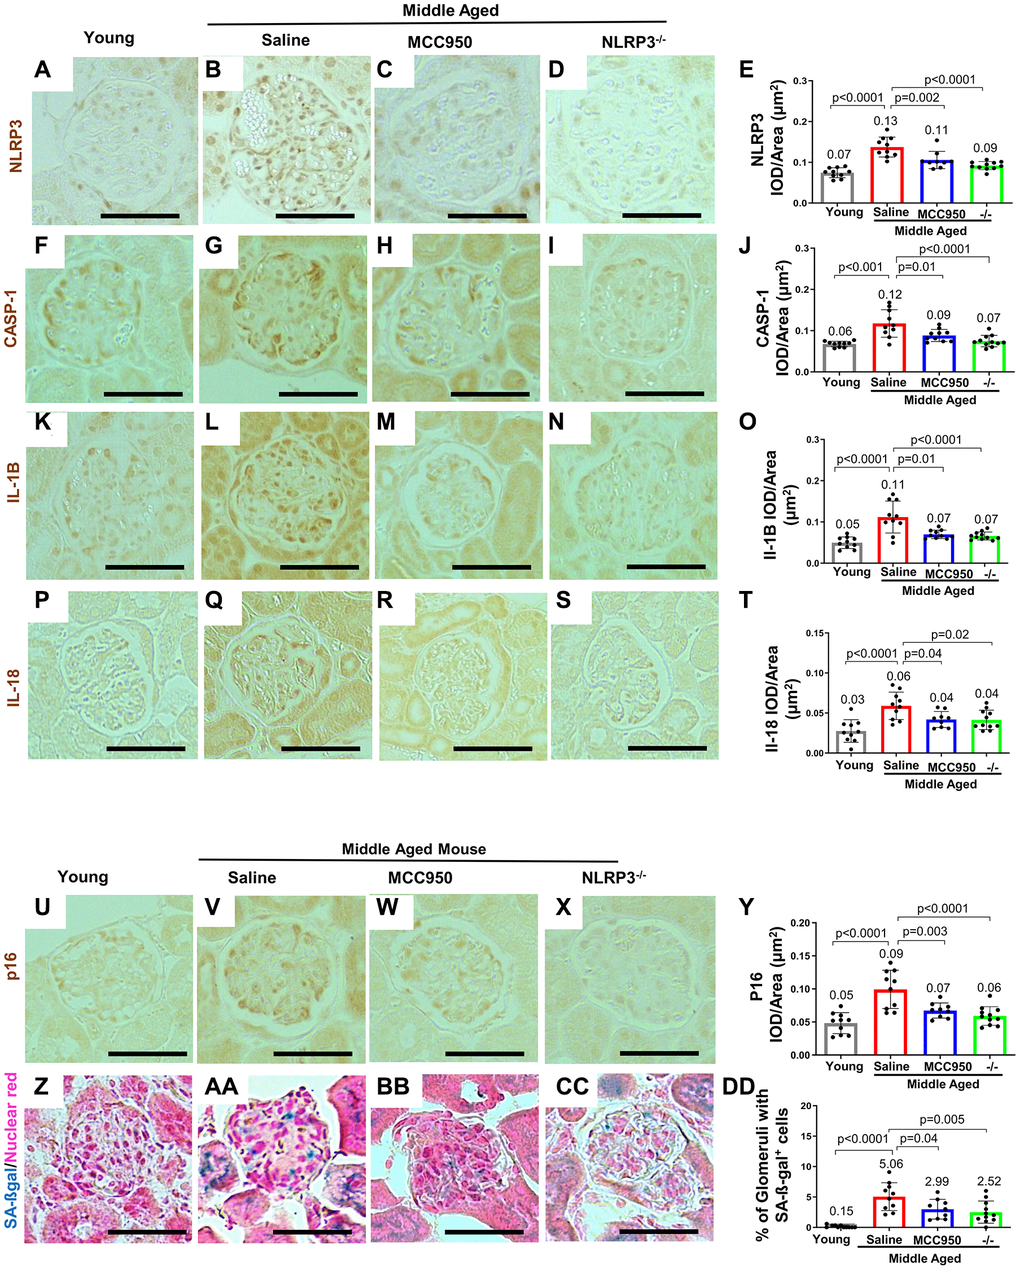 Inhibiting/Deleting NLRP3 in middle-aged mouse podocytes. (A–Y) Comparison of glomeruli from young and middle-aged mice treated with vehicle (Saline) or MCC950, as well as middle-aged Nlrp3-null mice by immunohistochemistry for NLRP3 (A–E), inflammasome downstream signaling components Caspase-1 (F–J), Interleukin-1β (IL-1β) (K–O), IL-18 (P–T) as well as the senescence marker p16 (U–Y). All immunostainings (brown color) were quantified using automated approaches, depicted as integral optical density/area (IOD/area) and analyzed by Student’s t-test statistics. (Z–DD) Staining for SA-β-Gal (blue) and nuclear red (red). SA-β-Gal is not detected in young mice (Z, DD), but increased in the glomerulus in saline treated middle aged mice, including podocytes (AA, DD). SA-β-Gal was lowered by MCC950 (BB, DD) and in age-matched NLRP3 null mice (CC, DD). Note that in all the conditions staining increased in glomeruli of middle-aged saline-treated and was lower in MCC950-treated (C, E) and in aged-matched NLRP3 null mice. The scale bars in the images correspond to 25 μm.